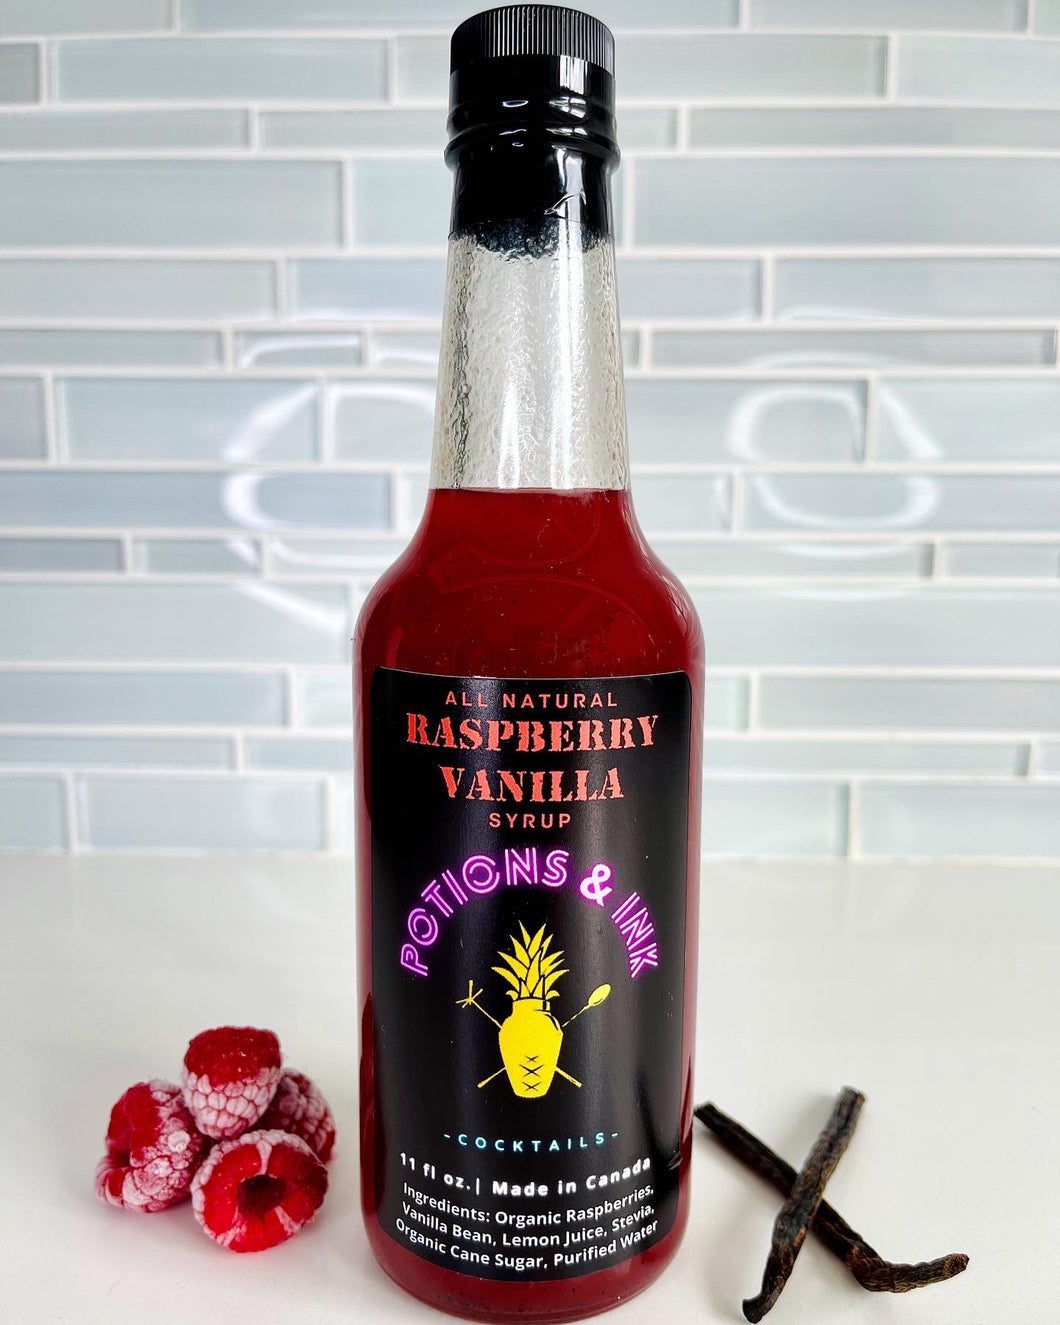 All Natural Raspberry Vanilla Syrup